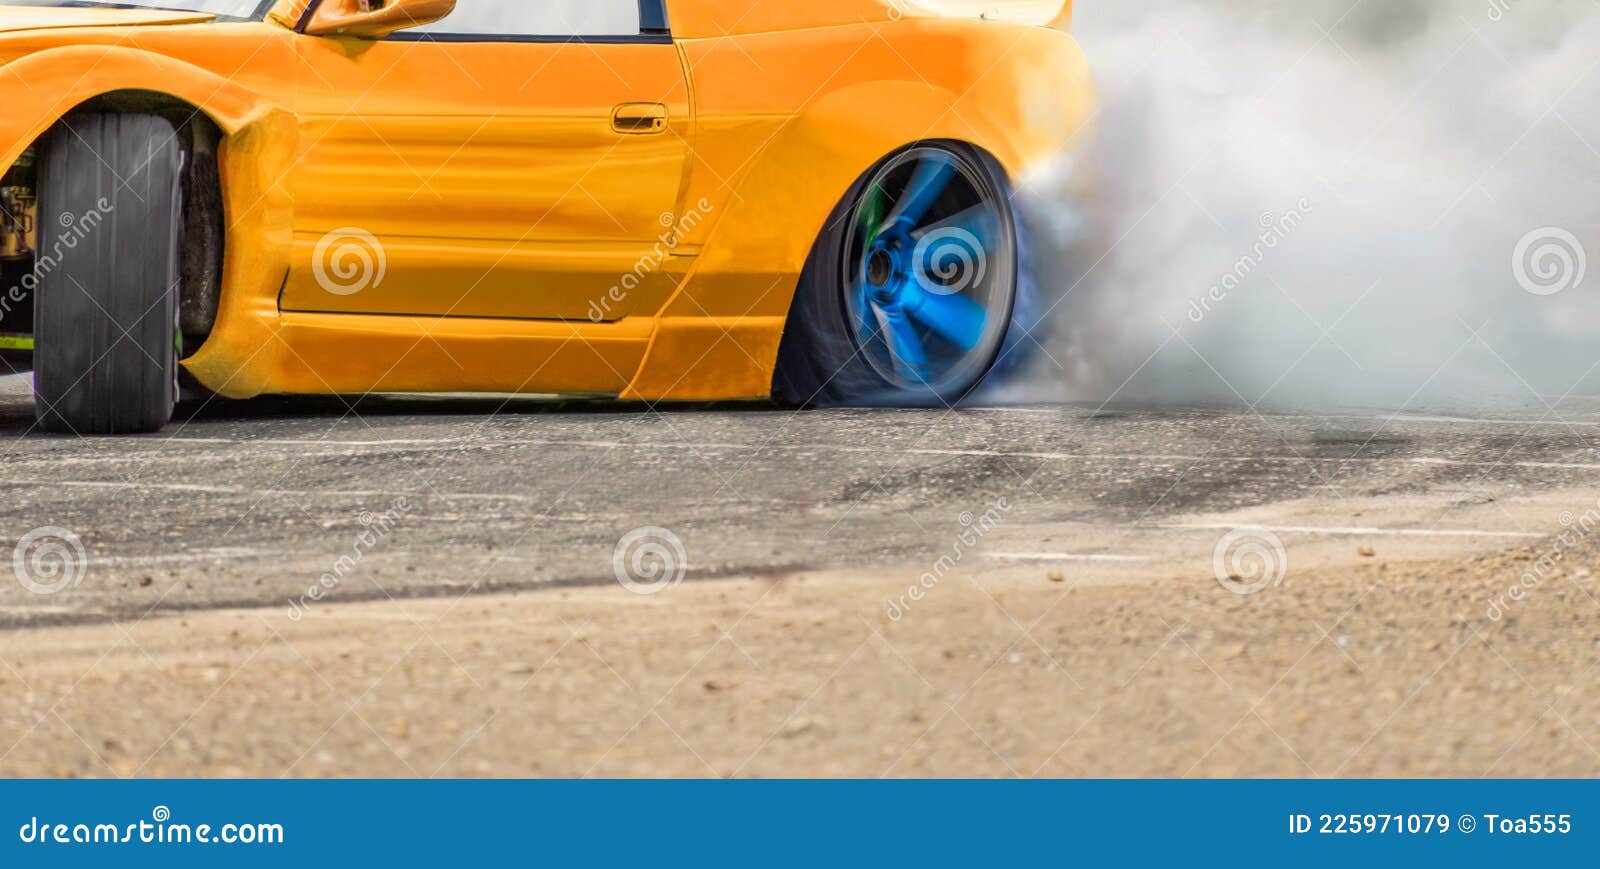 Car drifting image diffusion race drift car with lots of smoke from burning  tires on speed track Stock Illustration